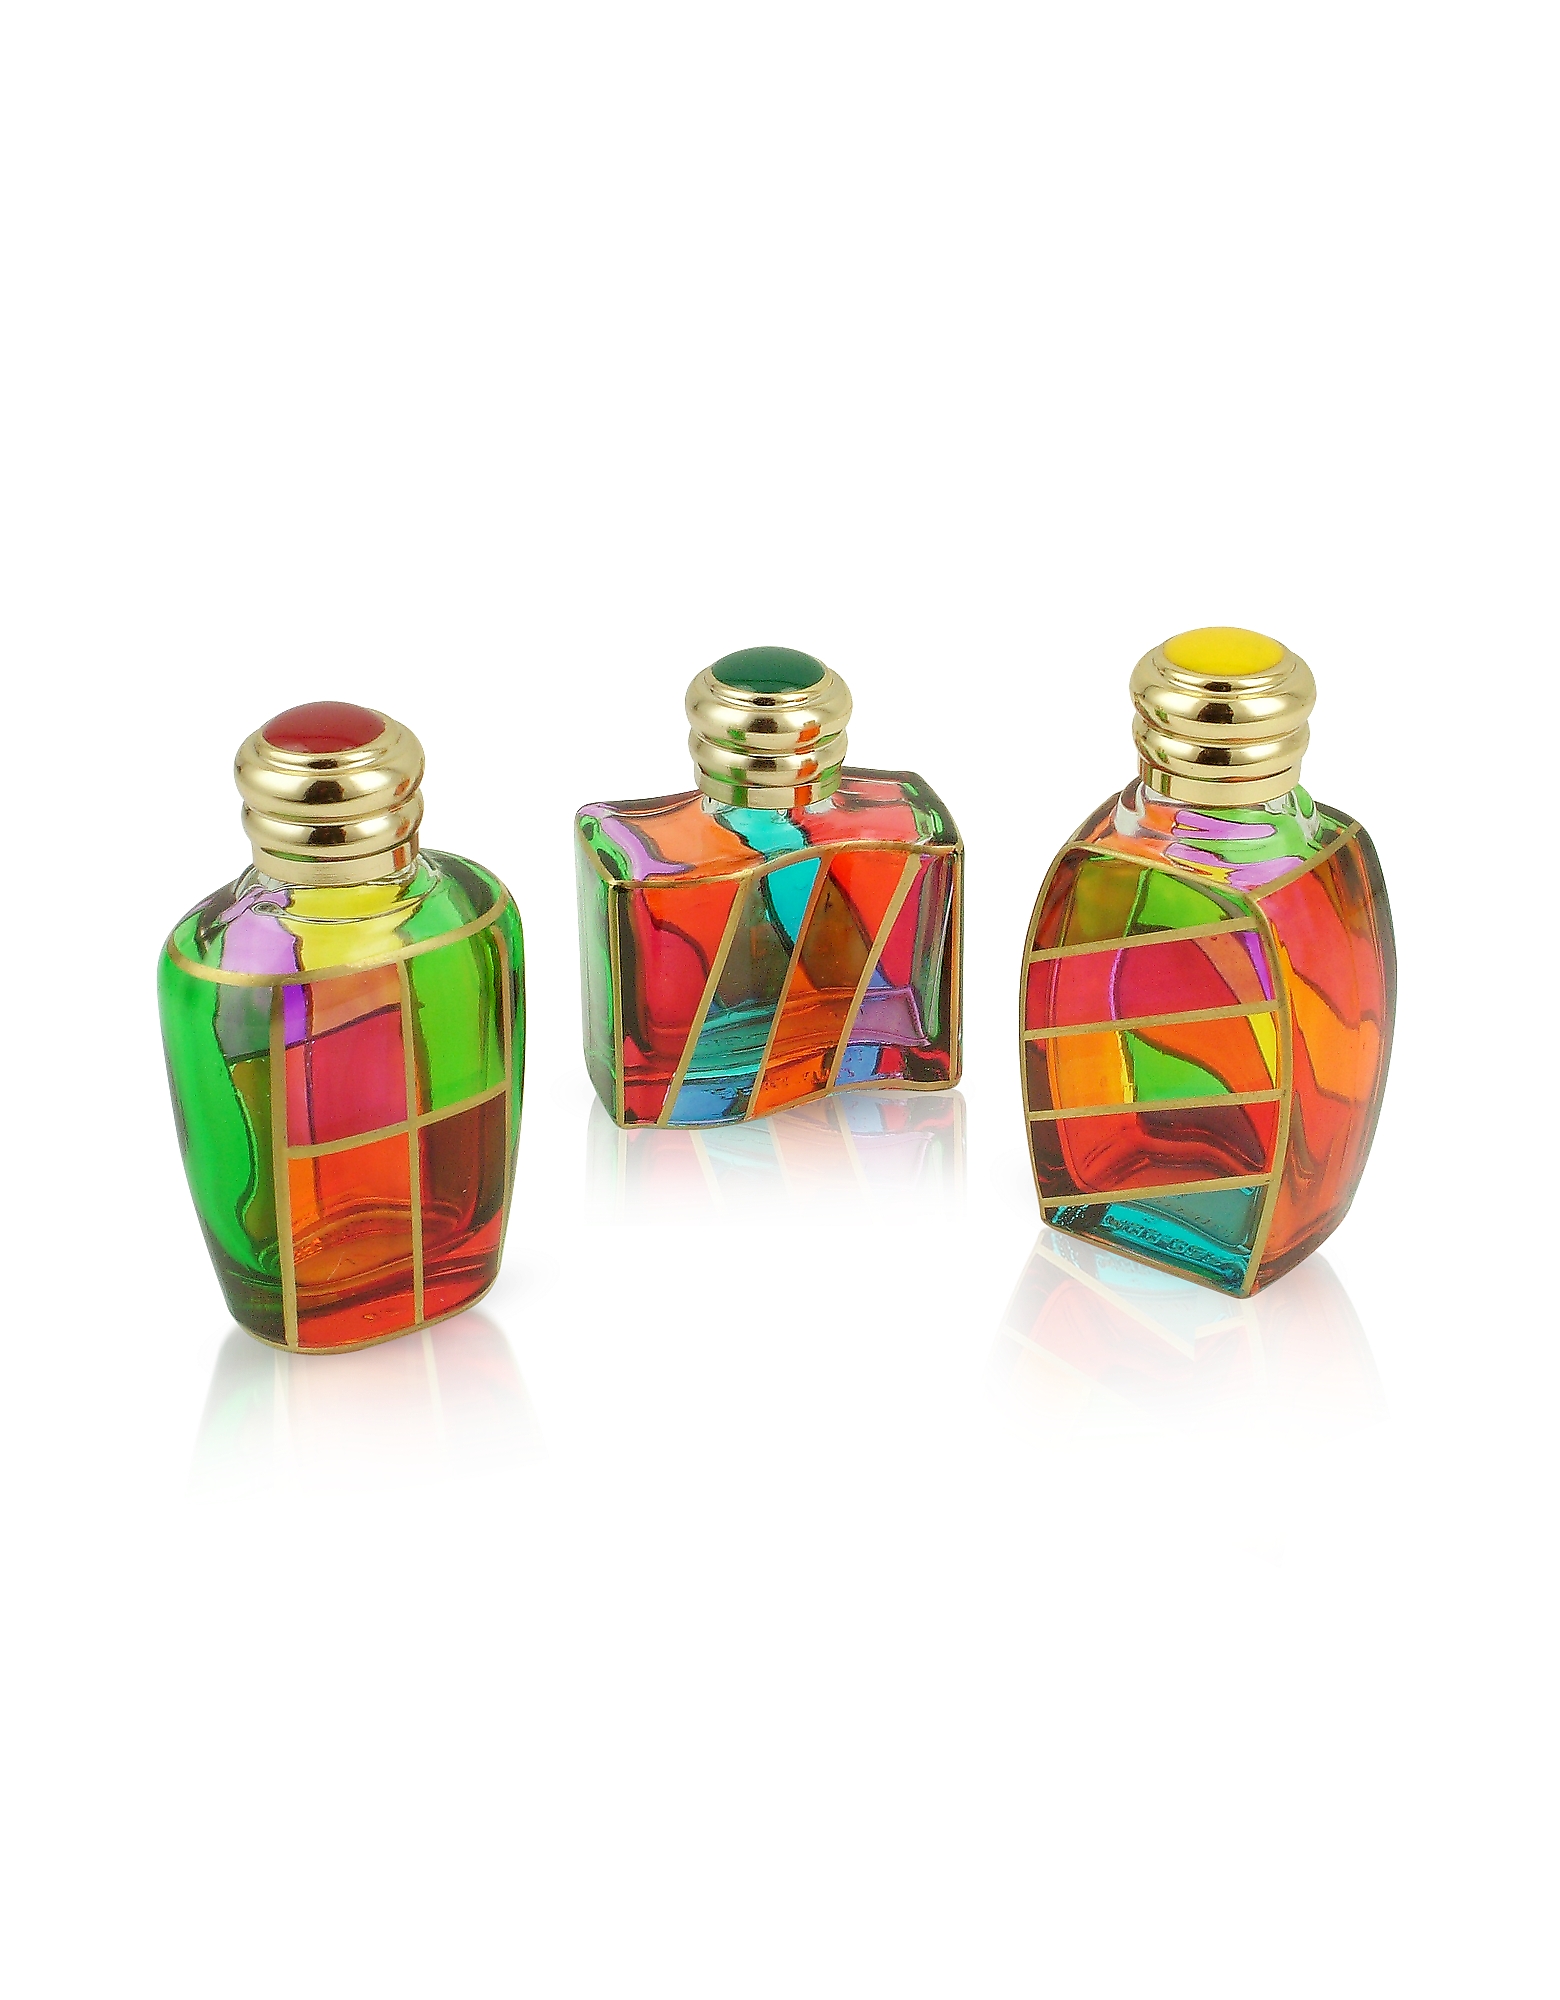 

Goldoni - Hand Decorated Murano Glass Enamel-Capped Perfume Bottles, Multicolor